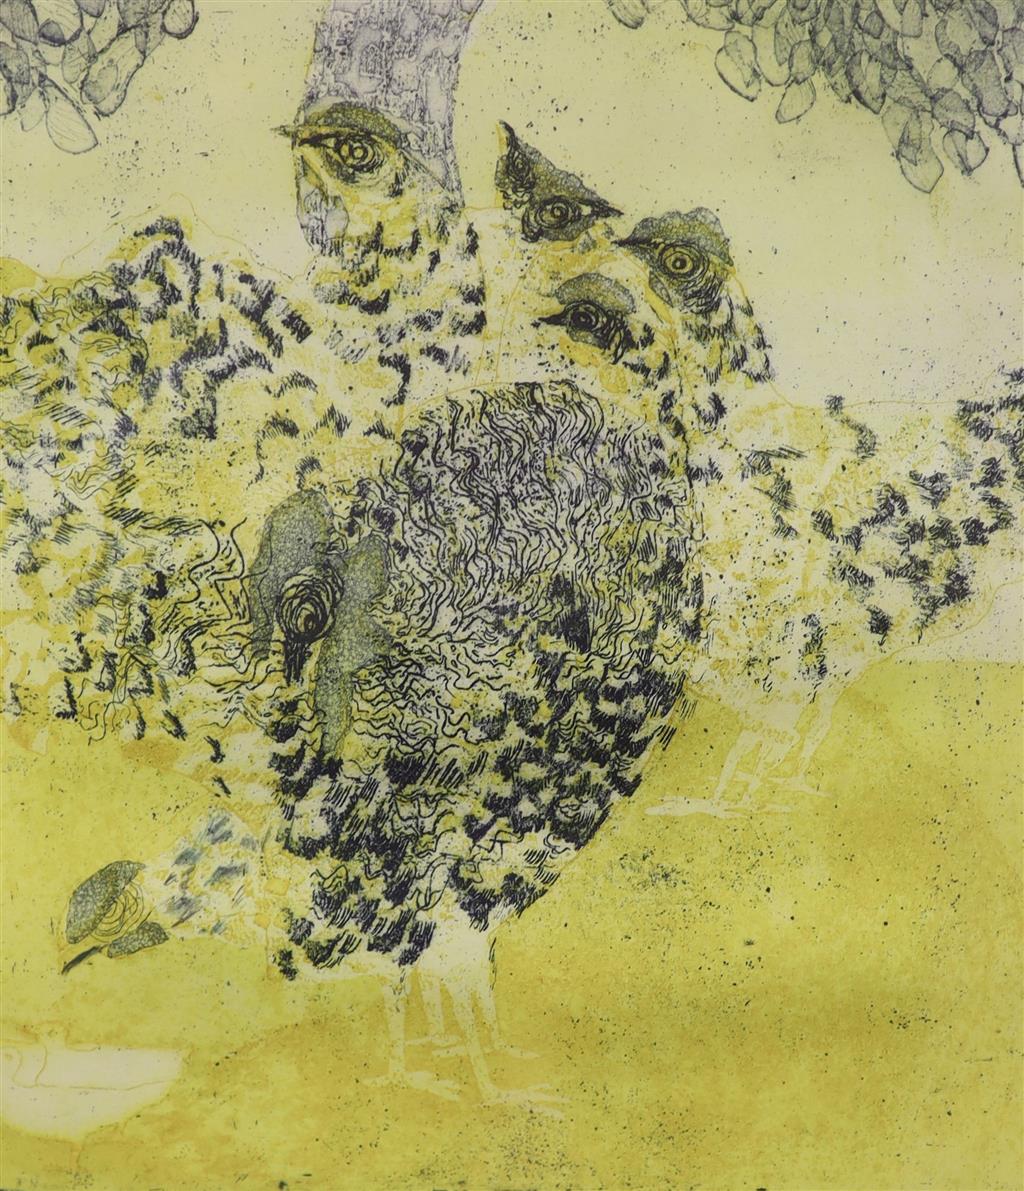 Patricia Moynagh, etching, Bantams, signed, 31 x 26cm